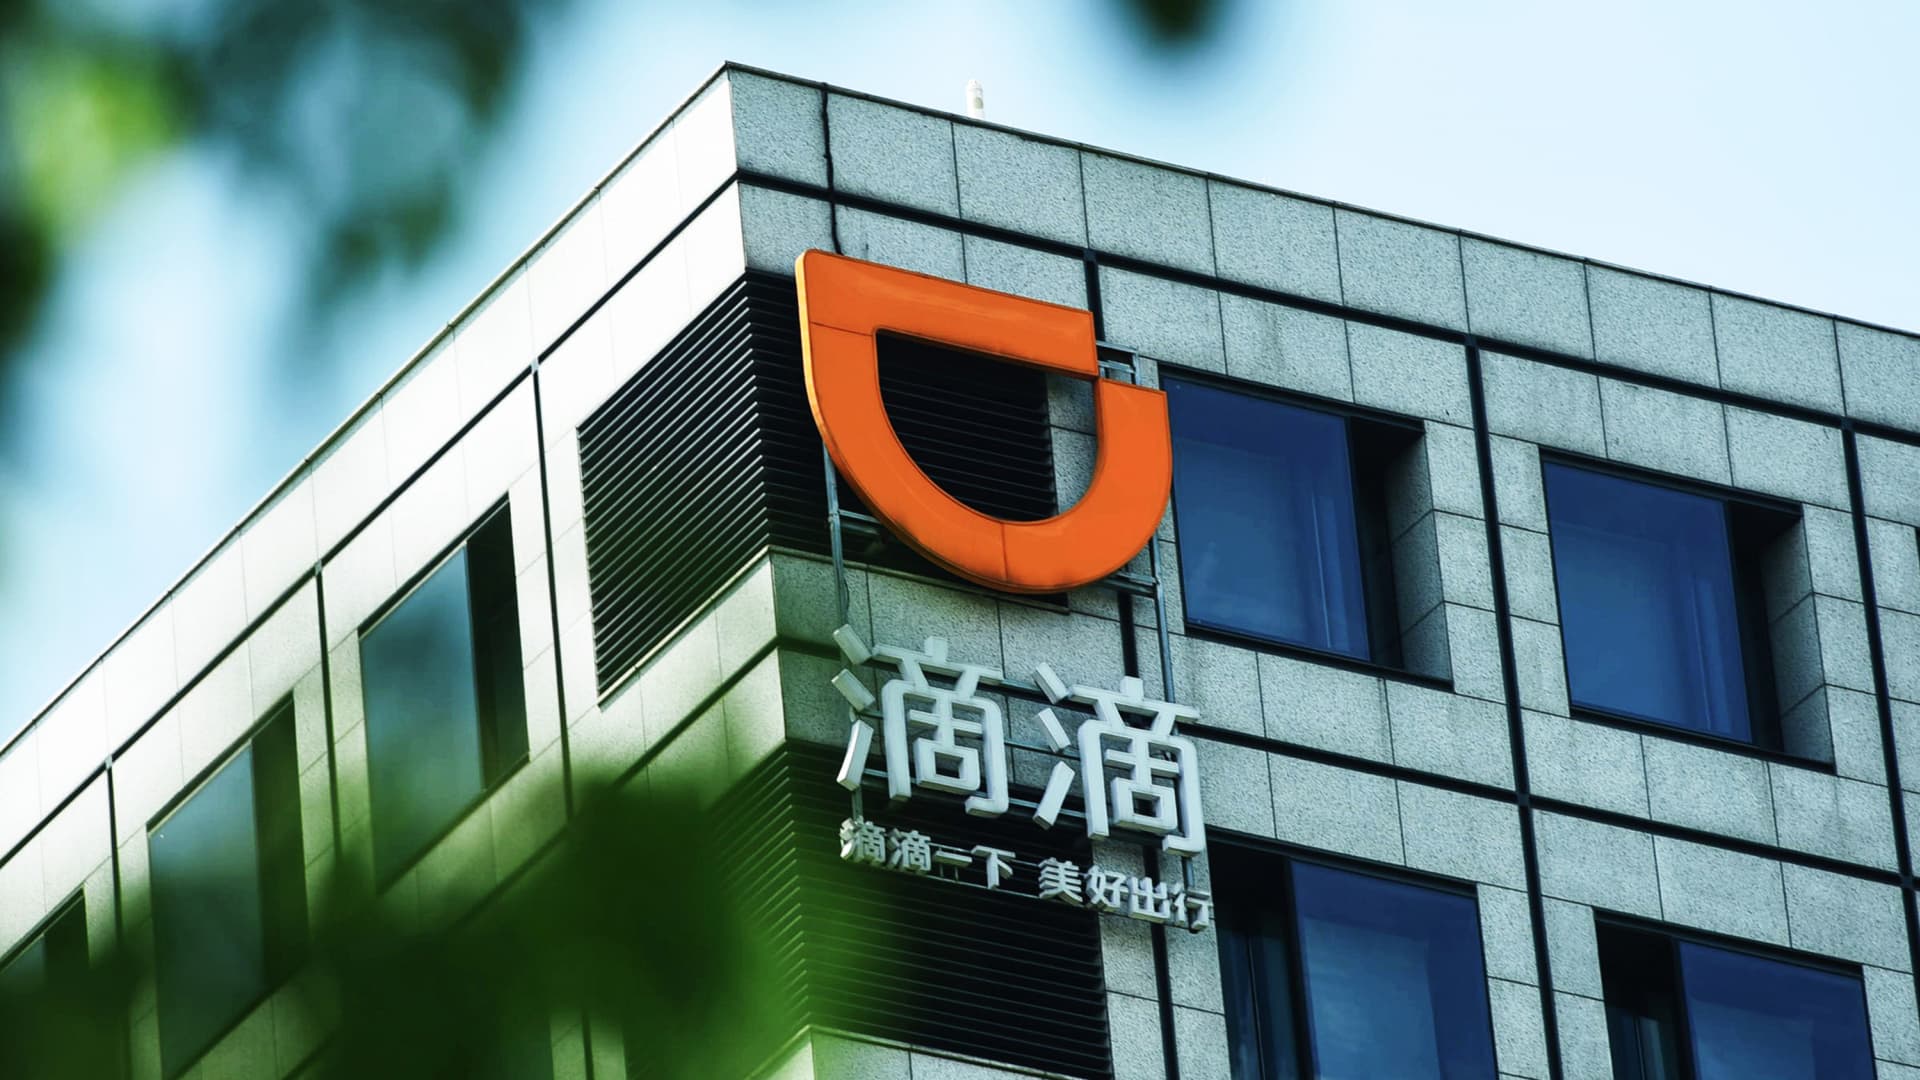 A logo of ride-hailing giant Didi Chuxing displayed on a building in Hangzhou in China's eastern Zhejiang province.